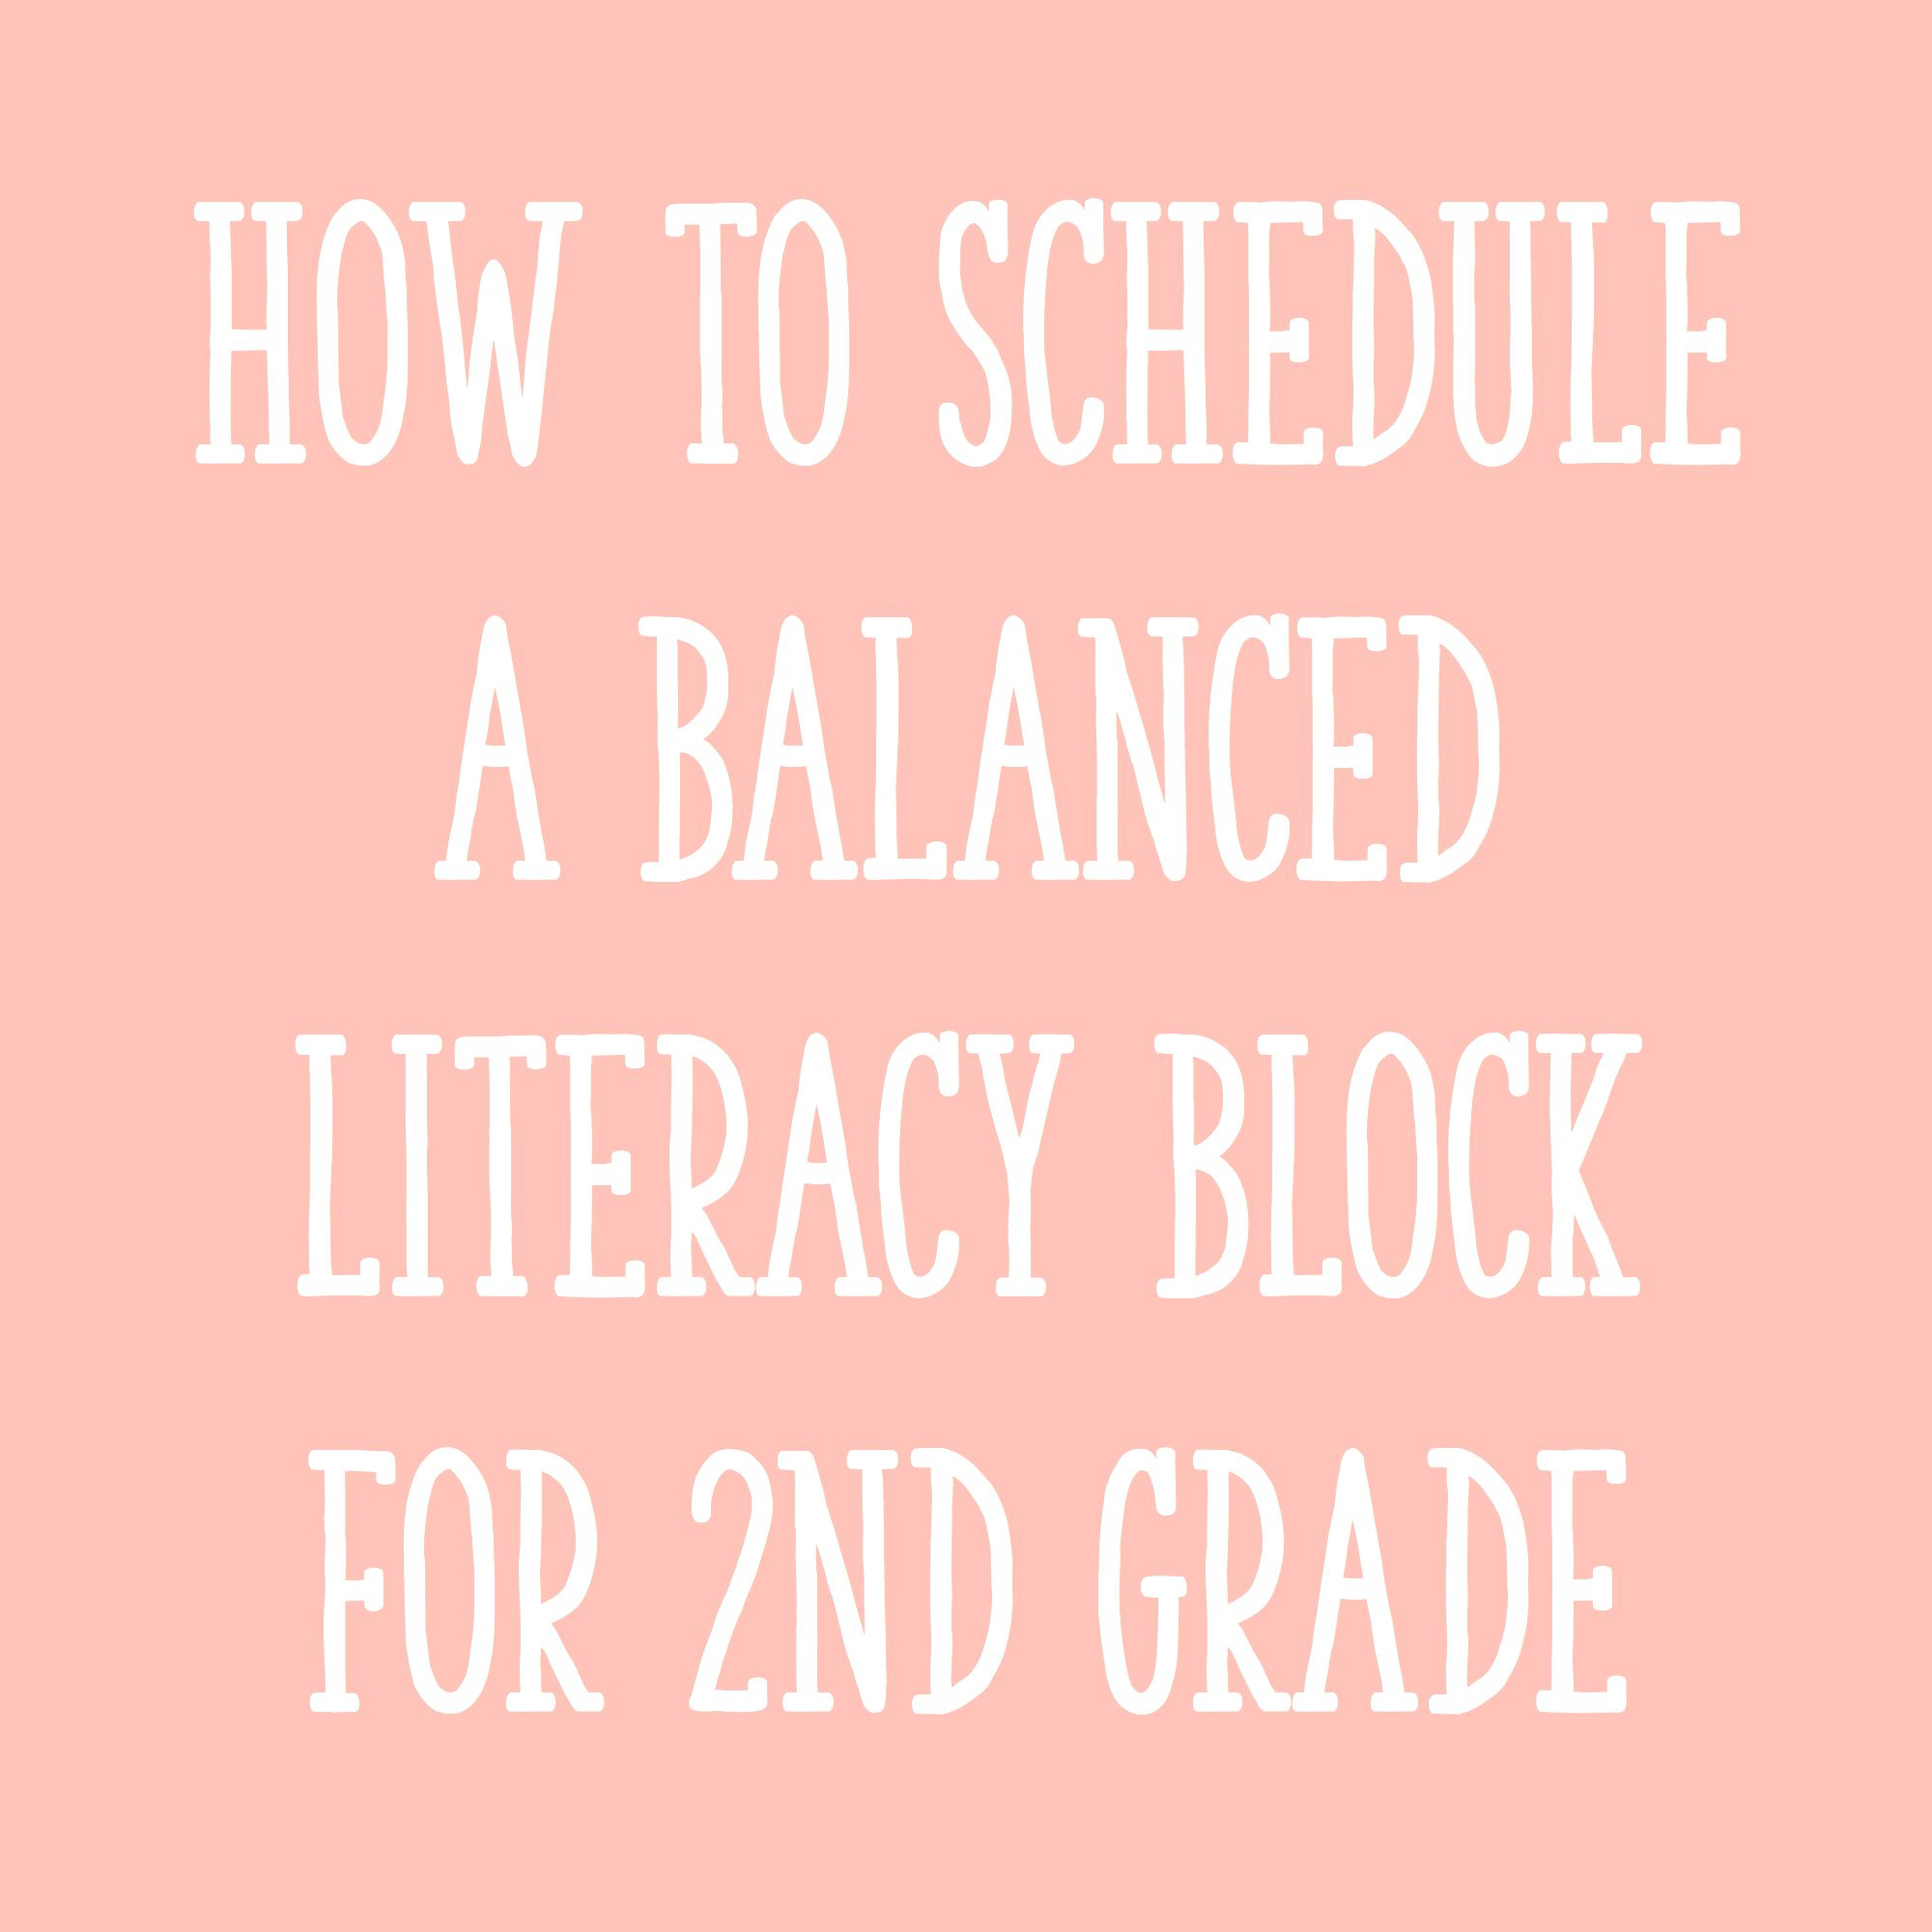 Fitting It All In: How To Schedule Your Literacy Block For